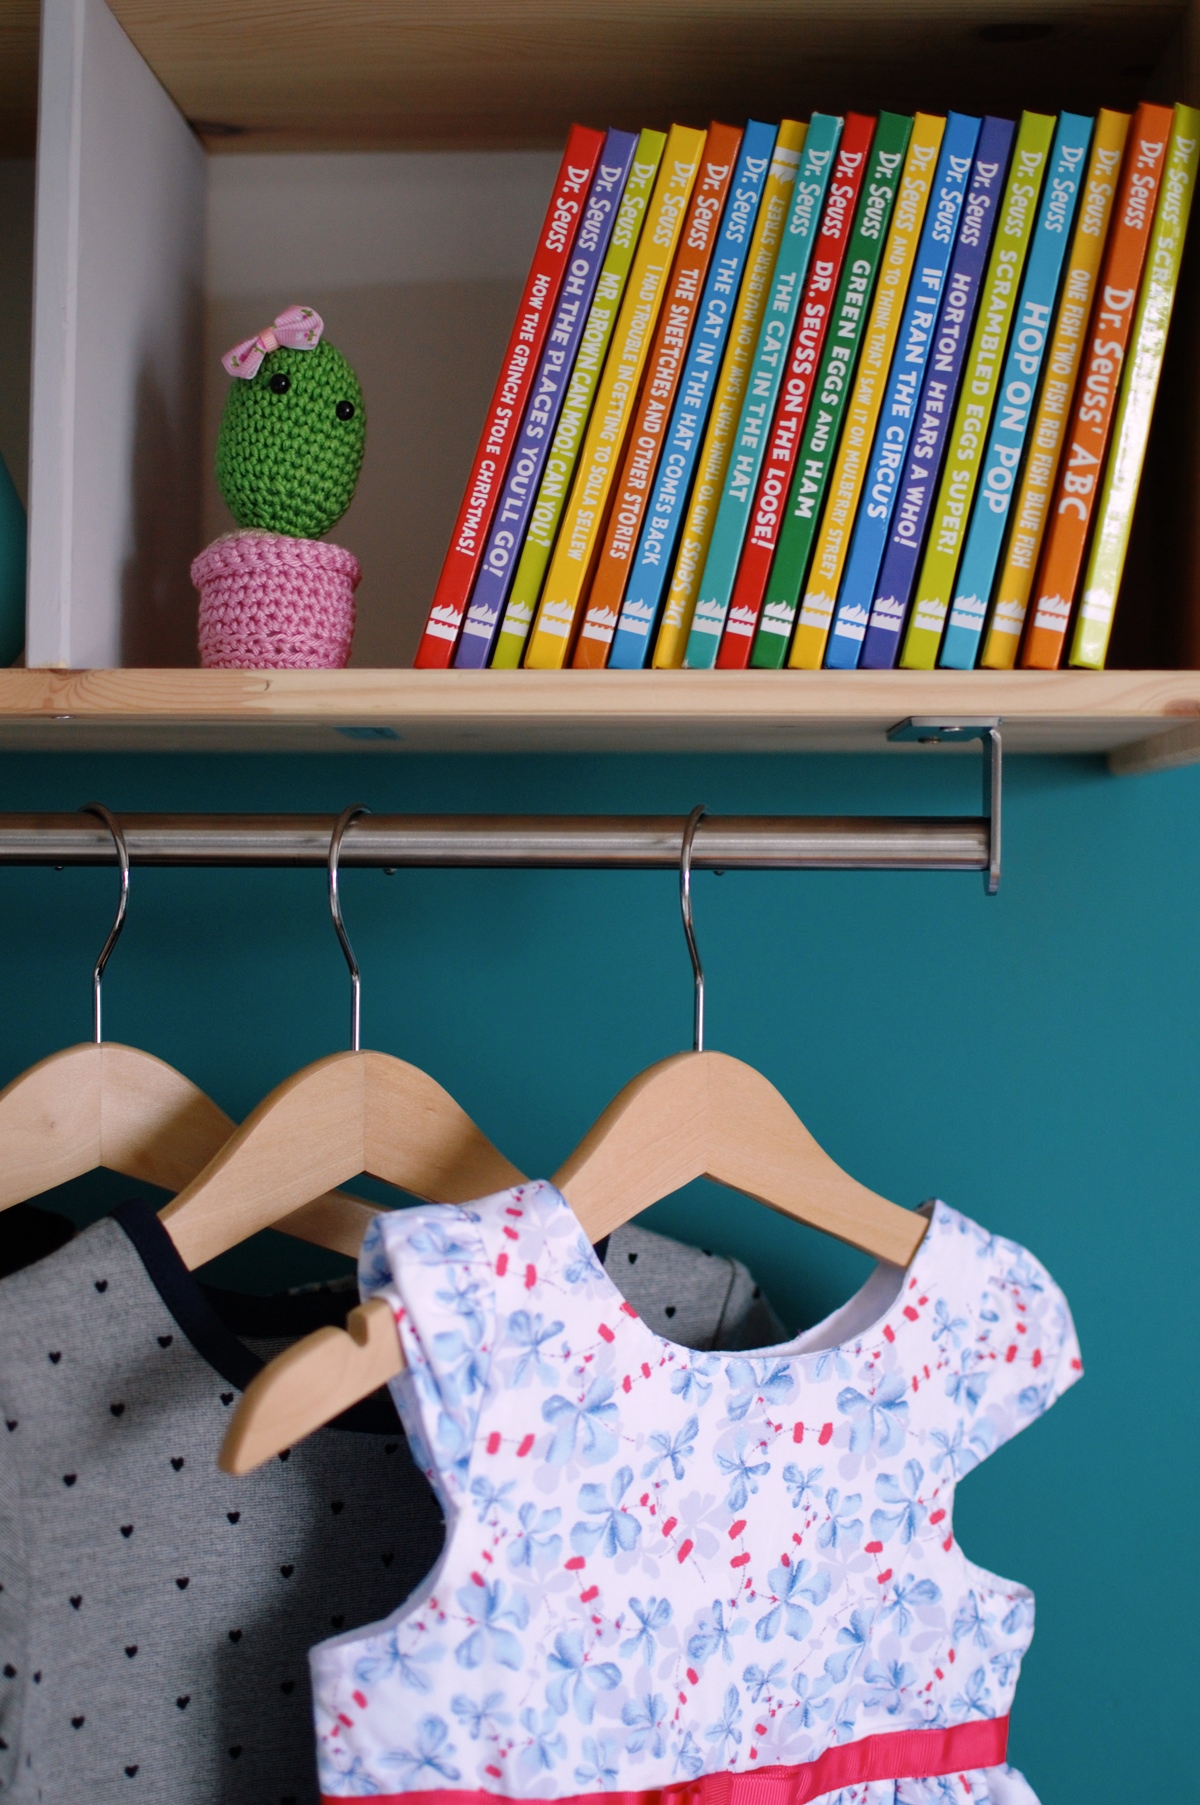 Colourful Toddler Bedroom Makeover